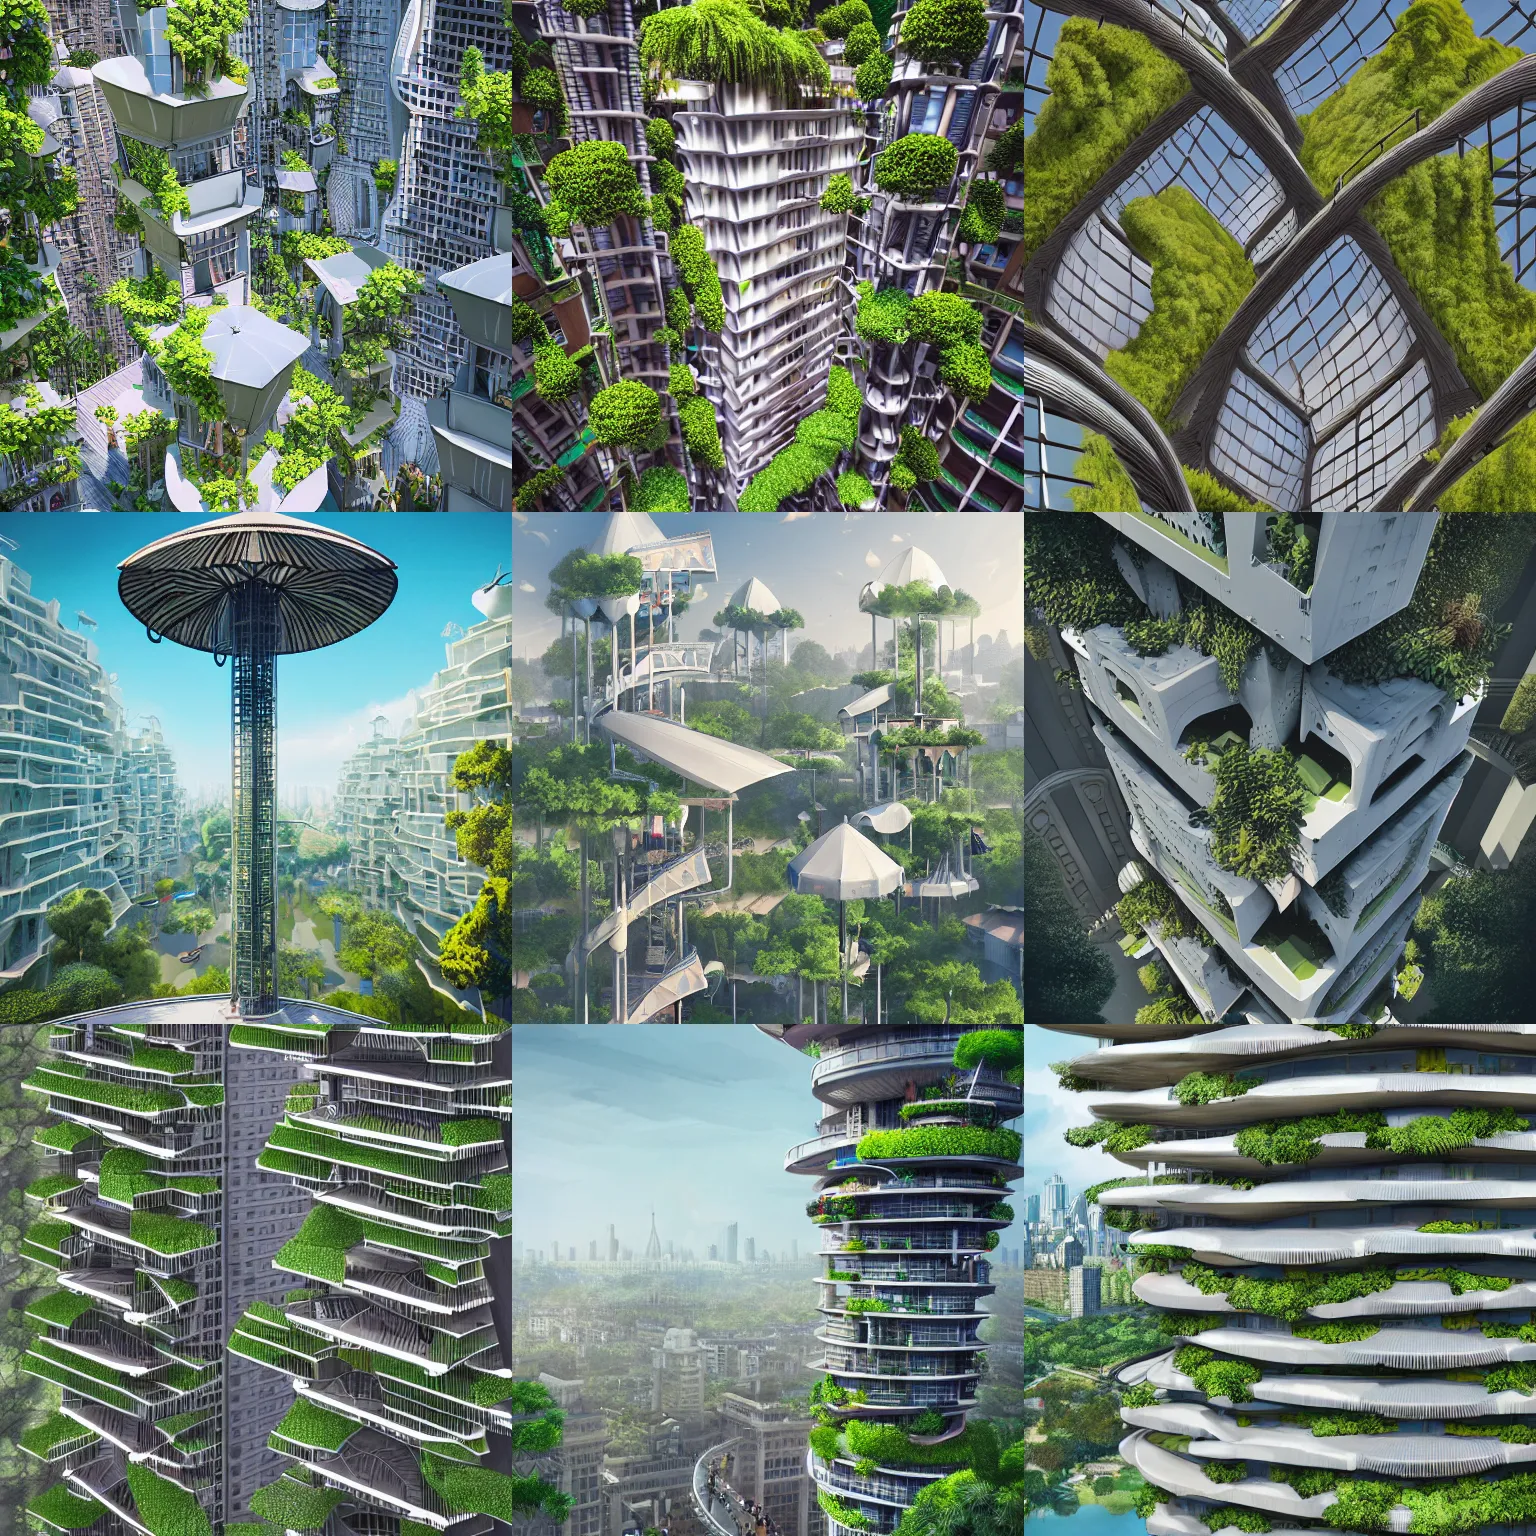 prompthunt: Sunrise over solarpunk city, vines, many trees and plants,  futuristic flying vehicles and drones, archdaily, architectural digest,  busy streets filled with people, sun rays, colorful blooming flowers,  vertical gardens, utopia, beautiful